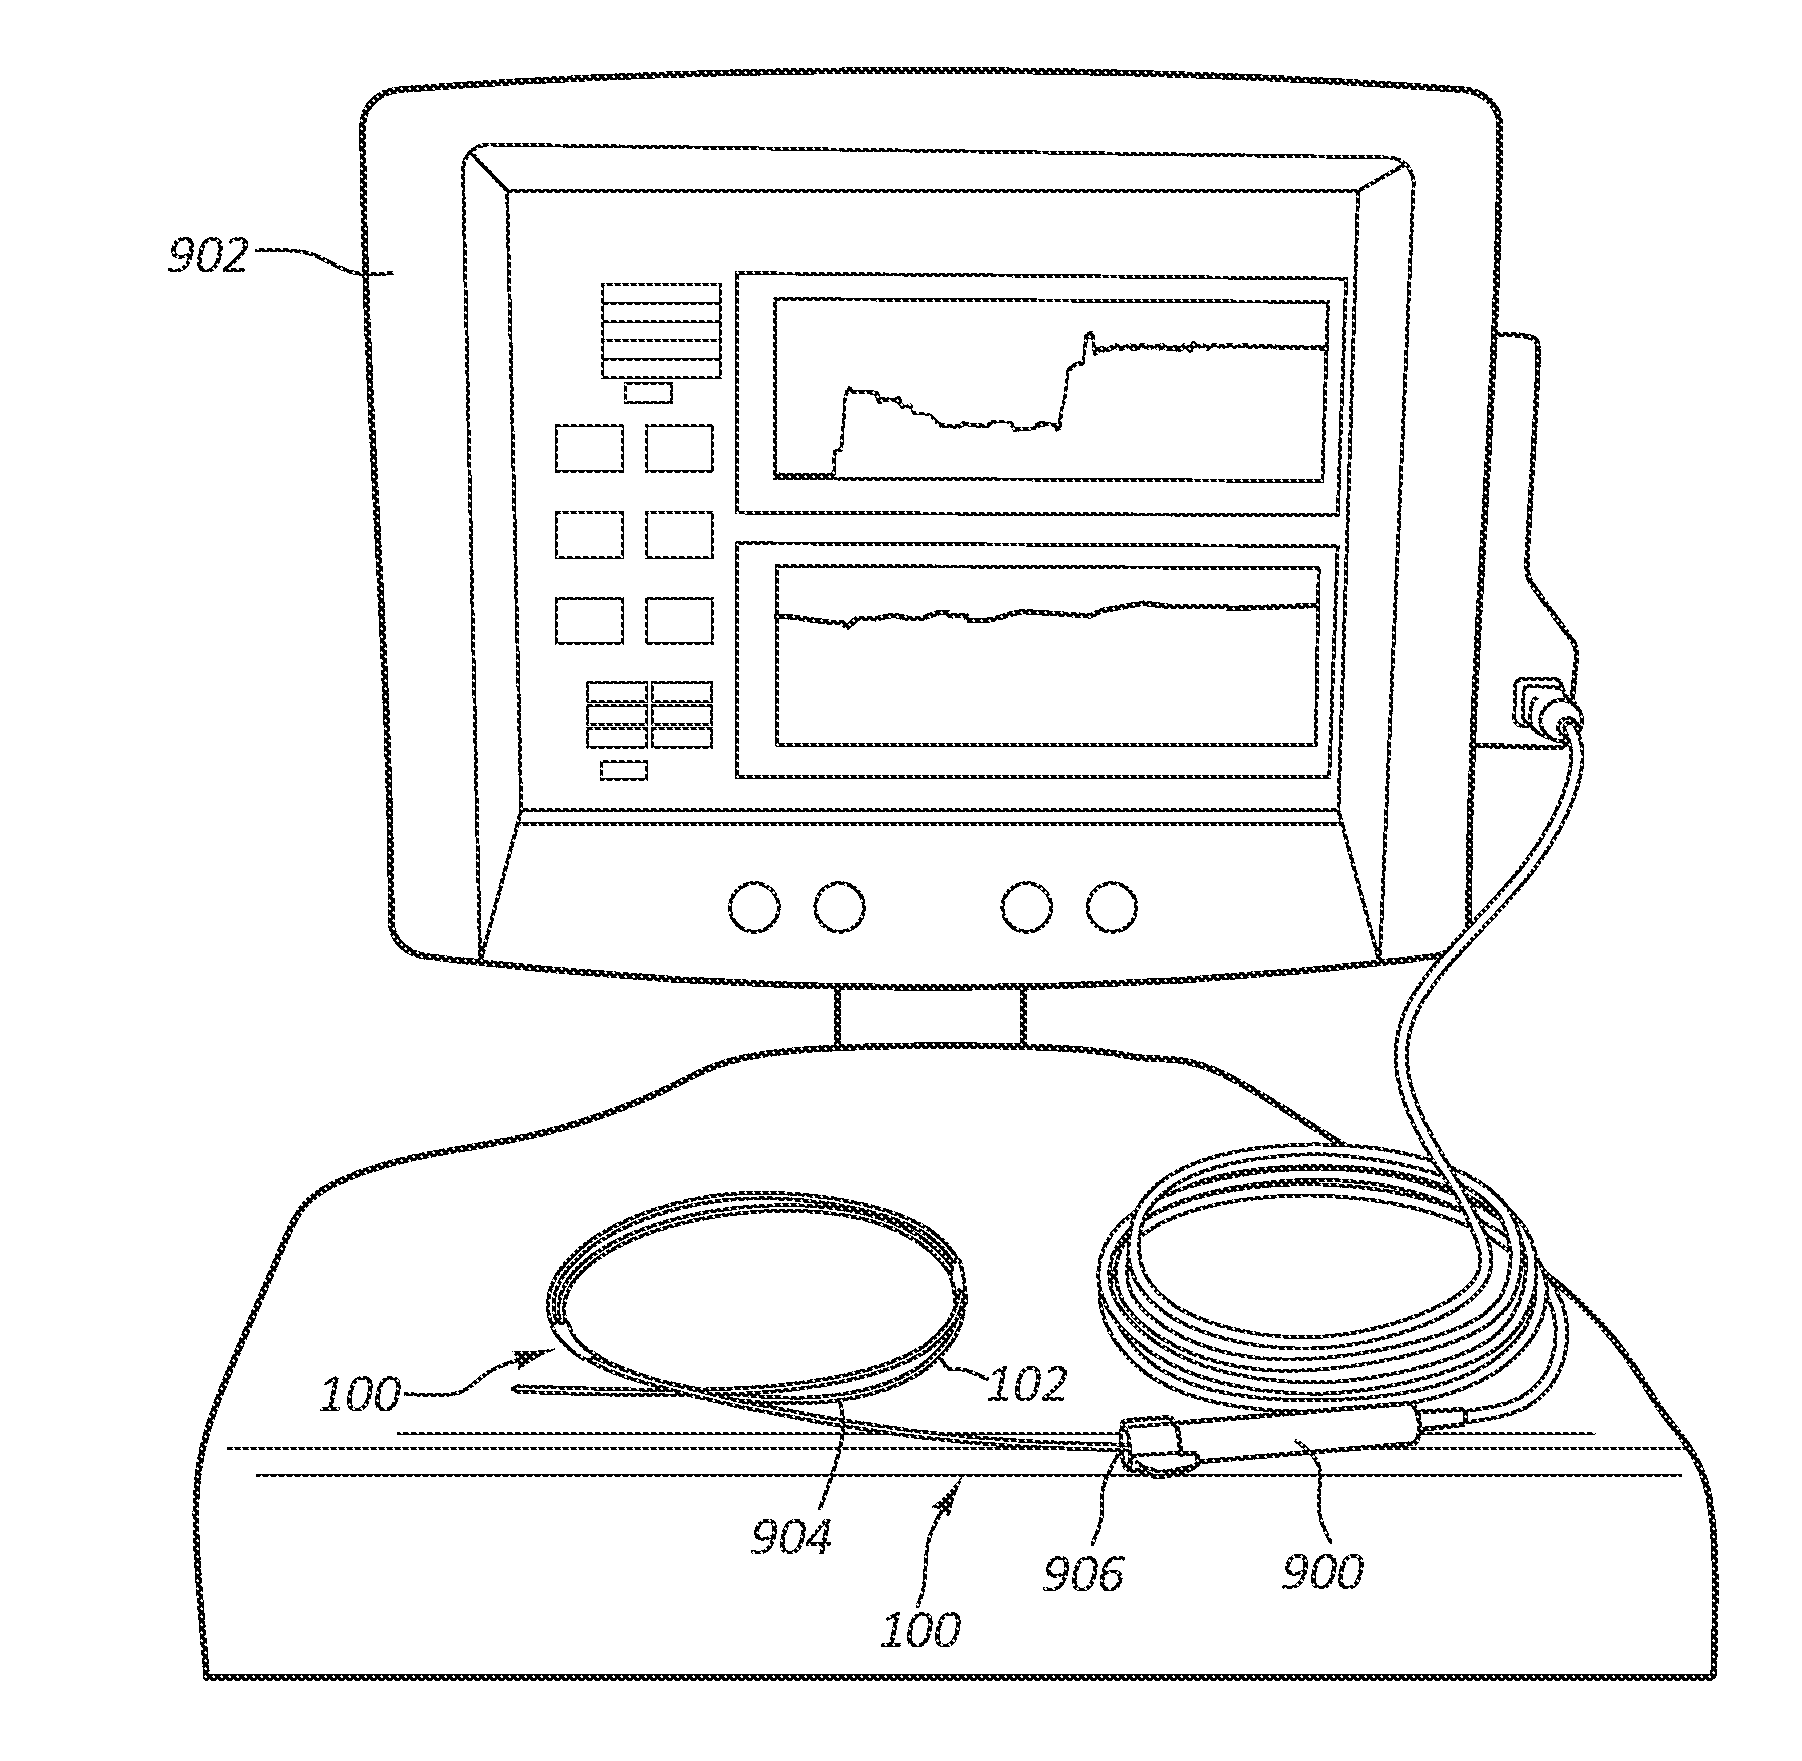 Apparatus and Methods Relating to Intravascular Positioning of Distal End of Catheter